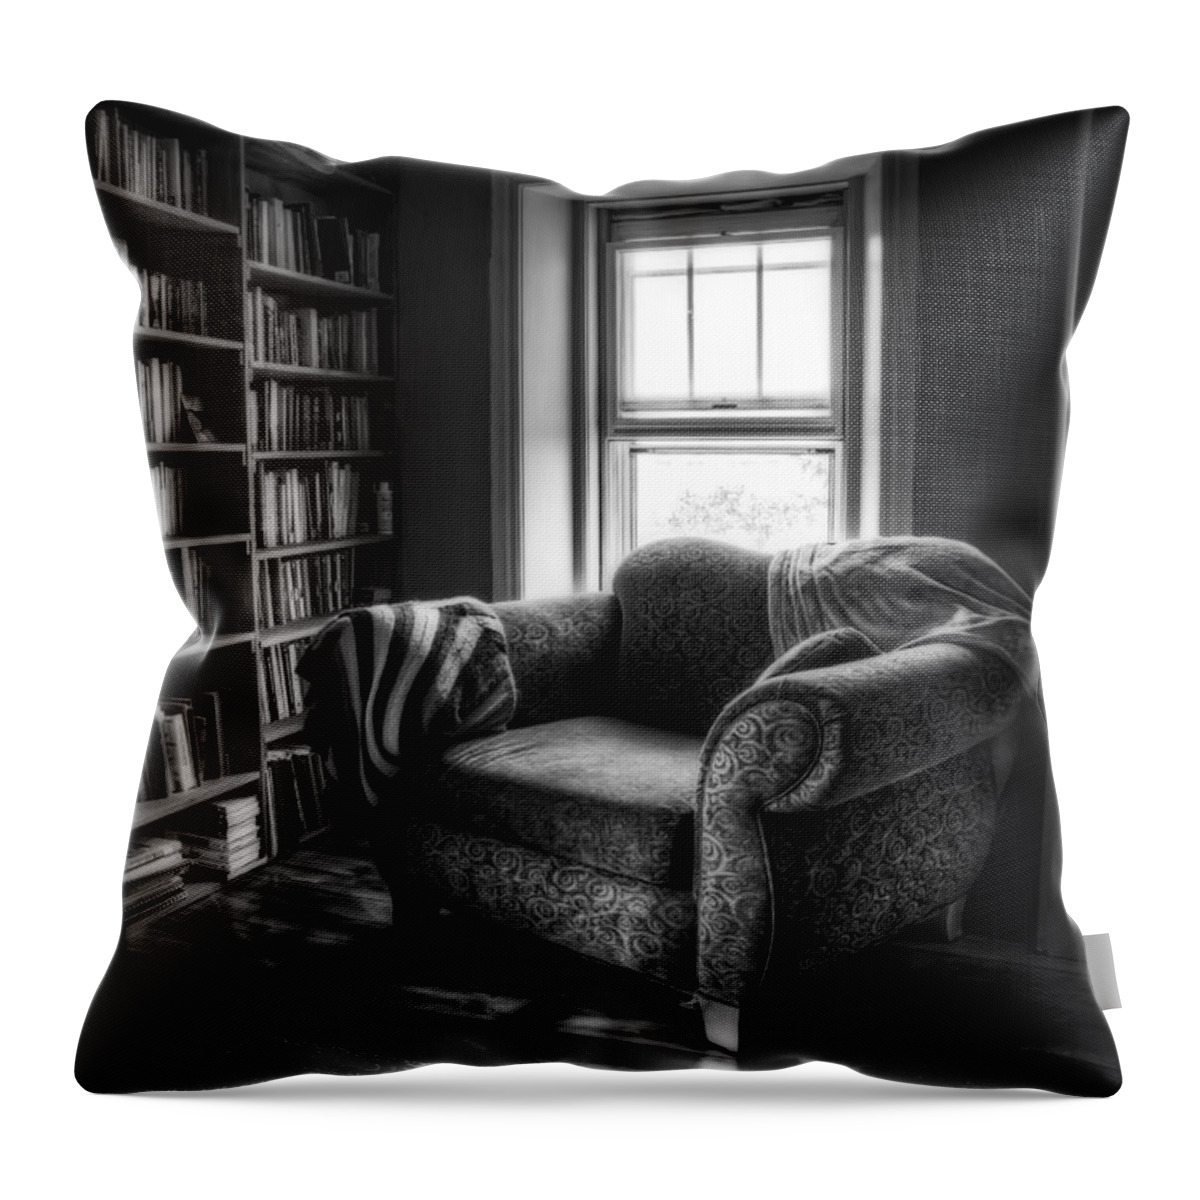 Library Throw Pillow featuring the photograph Sanctuary by Scott Norris